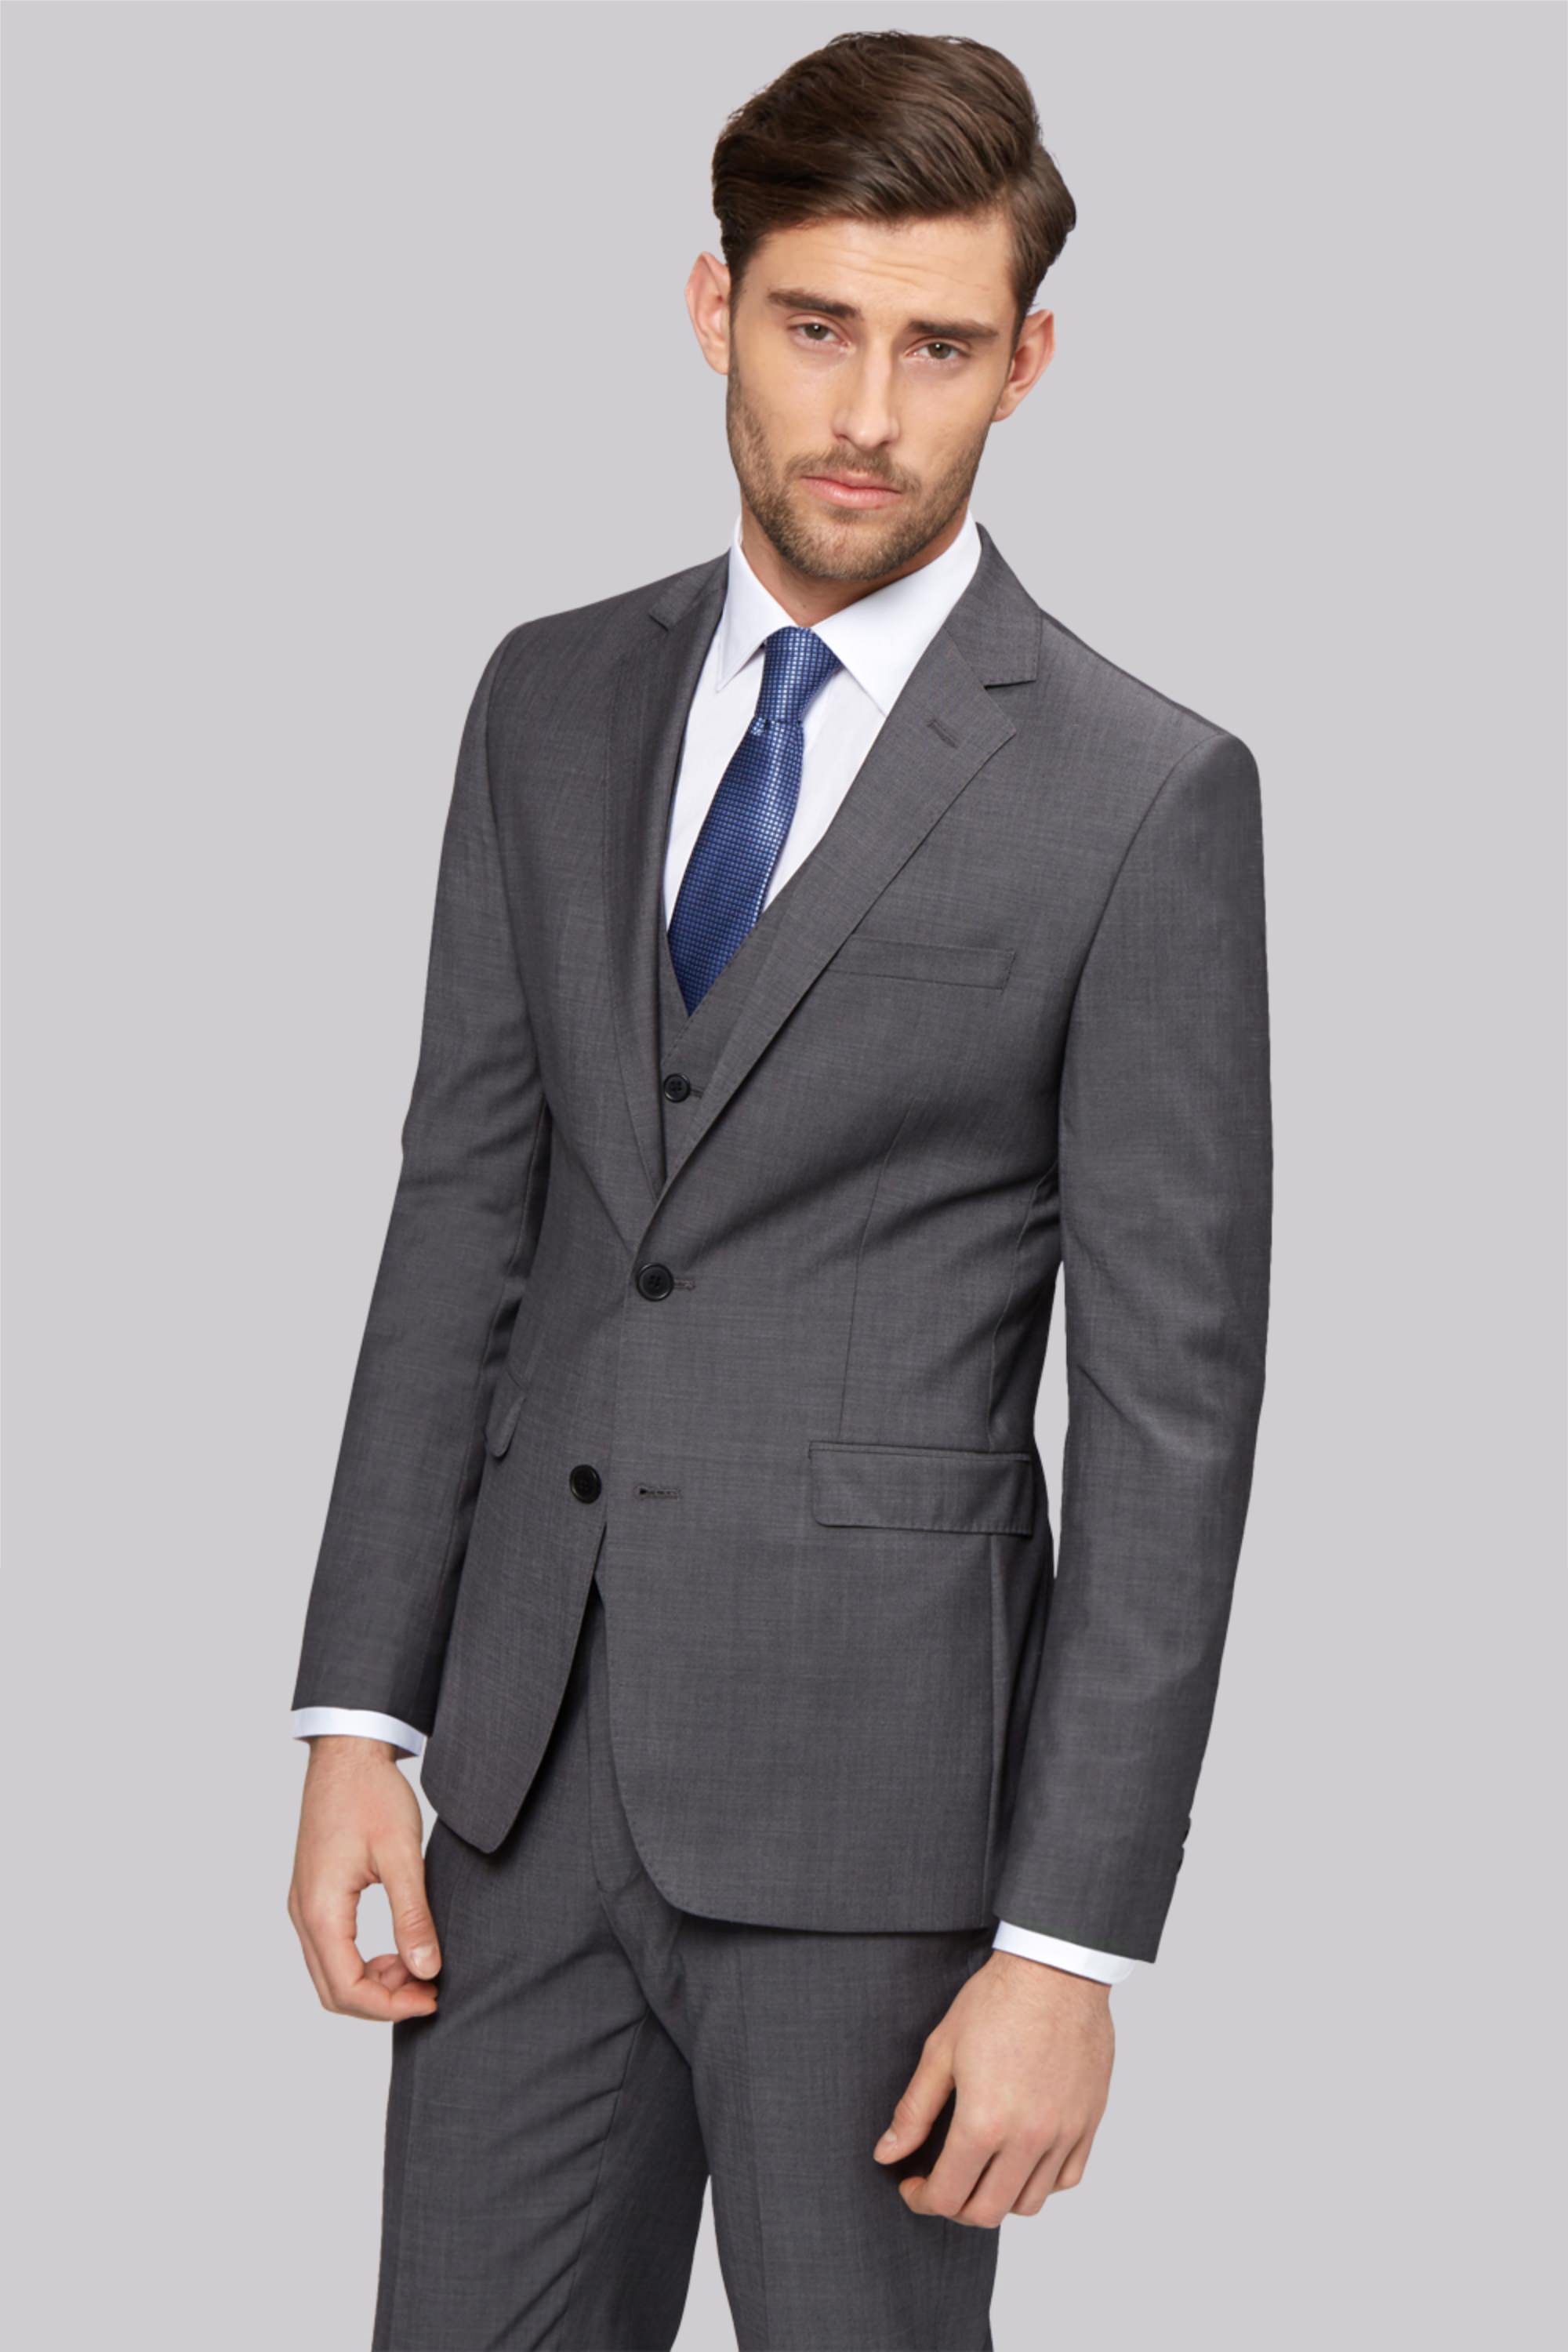 Moss 1851 Tailored Fit Grey Tonic Jacket | Buy Online at Moss